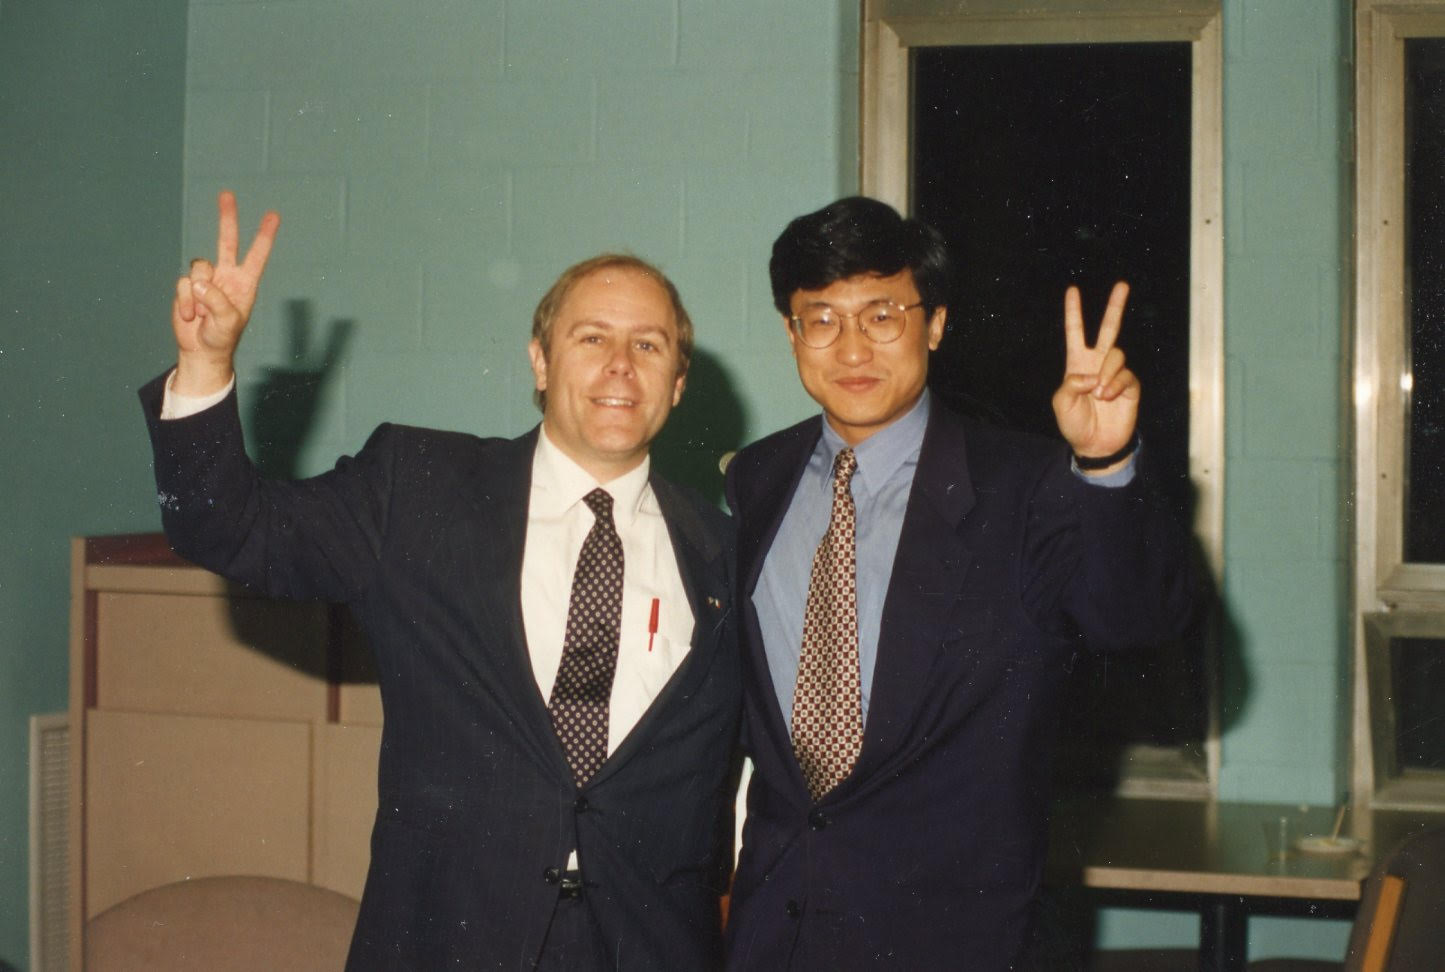 Image: McKiernan with Li Lu, a student leader of the 1989 Tiananmen Square student protests.